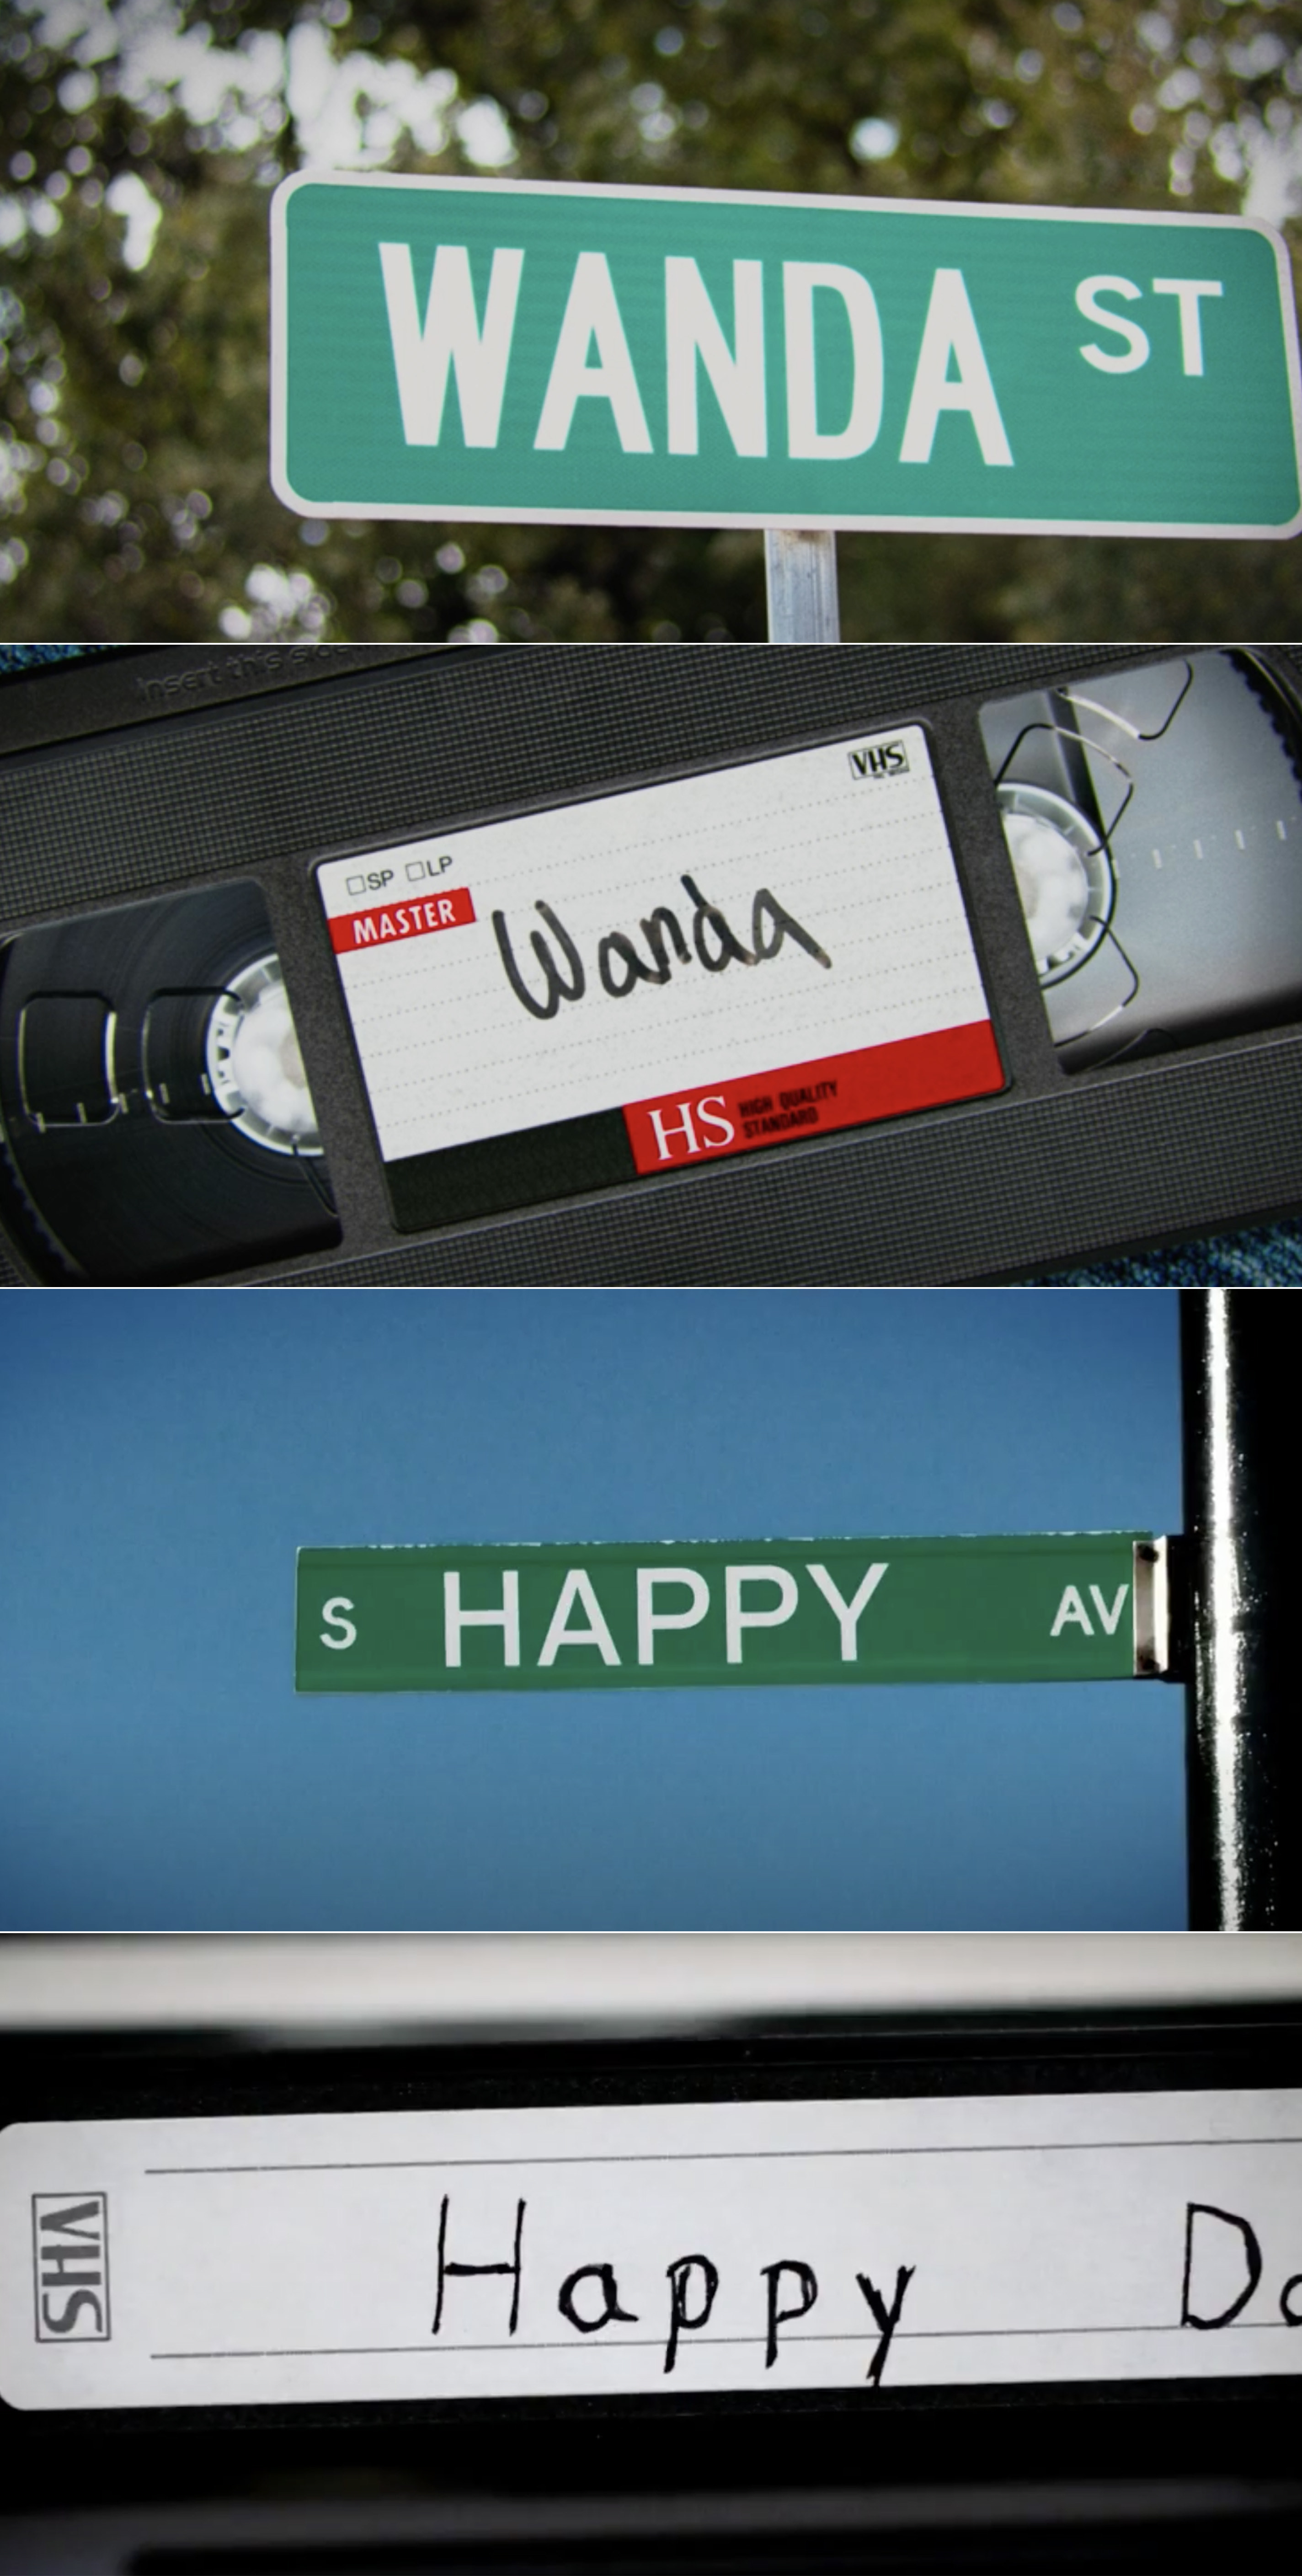 A street sign and VHS tape saying &quot;Wanda&quot; vs. a street sign and VHS tape saying &quot;Happy&quot;